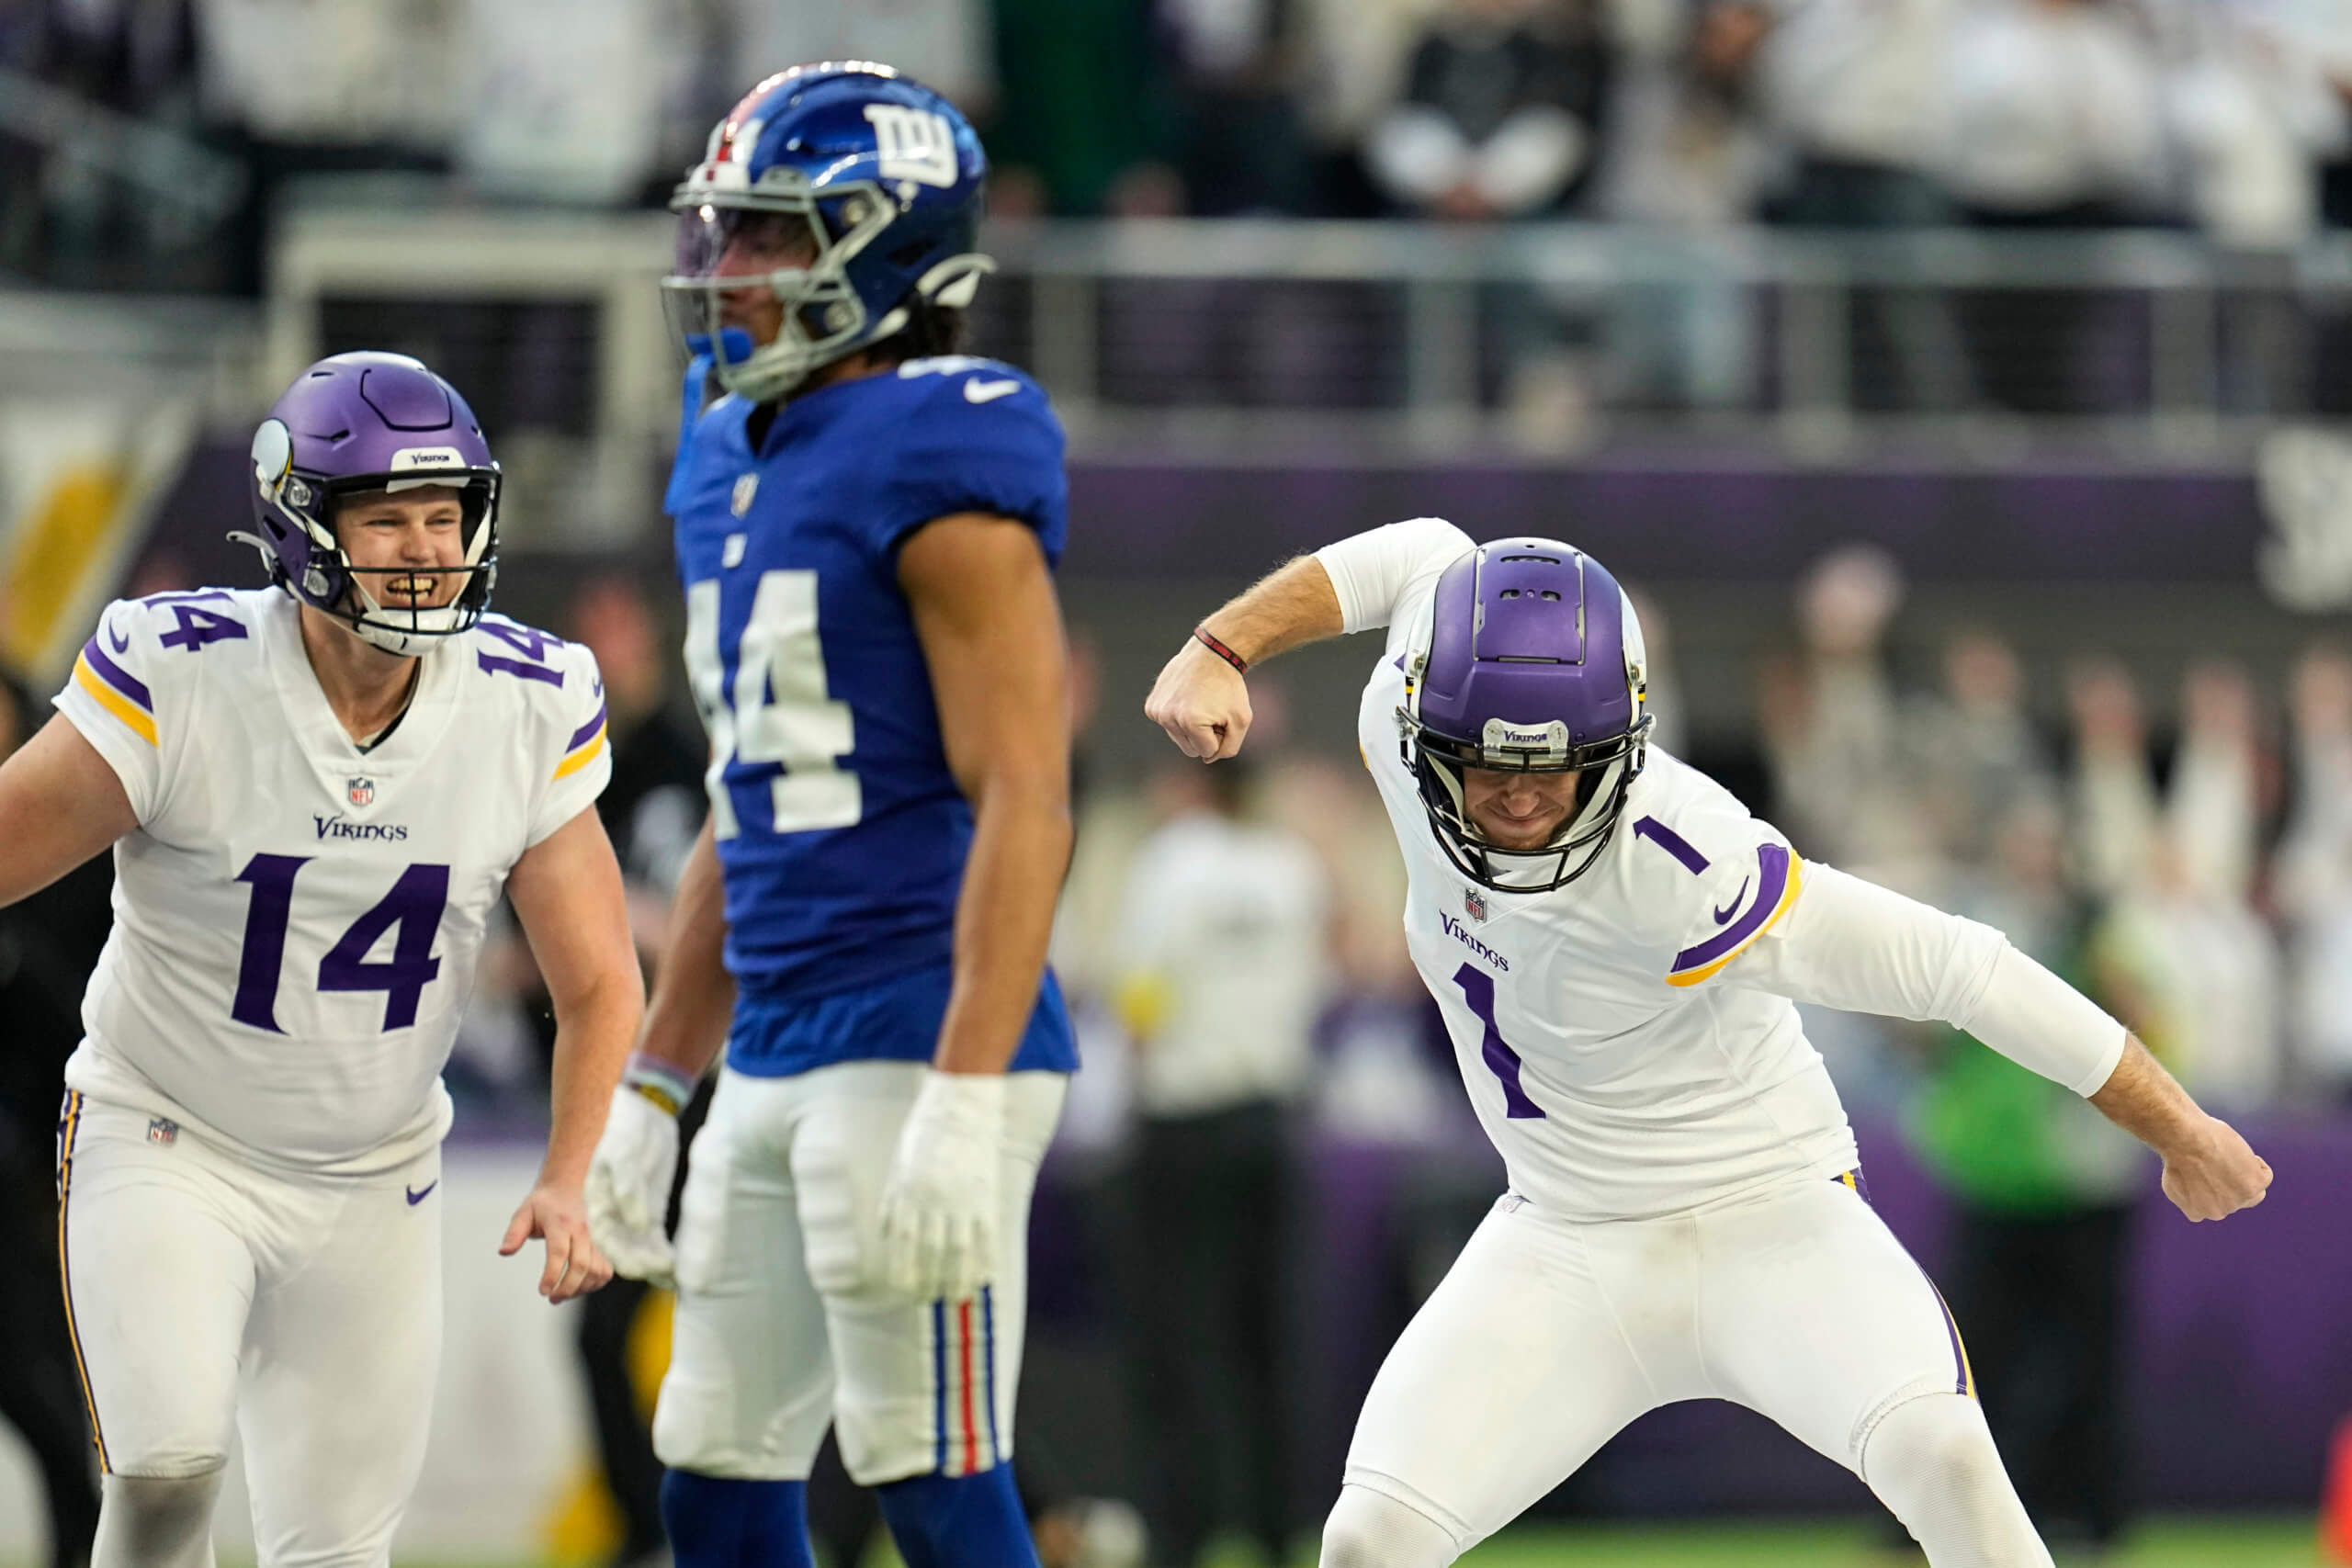 Giants playoffs schedule: NFL reveals Giants vs. Vikings playoff